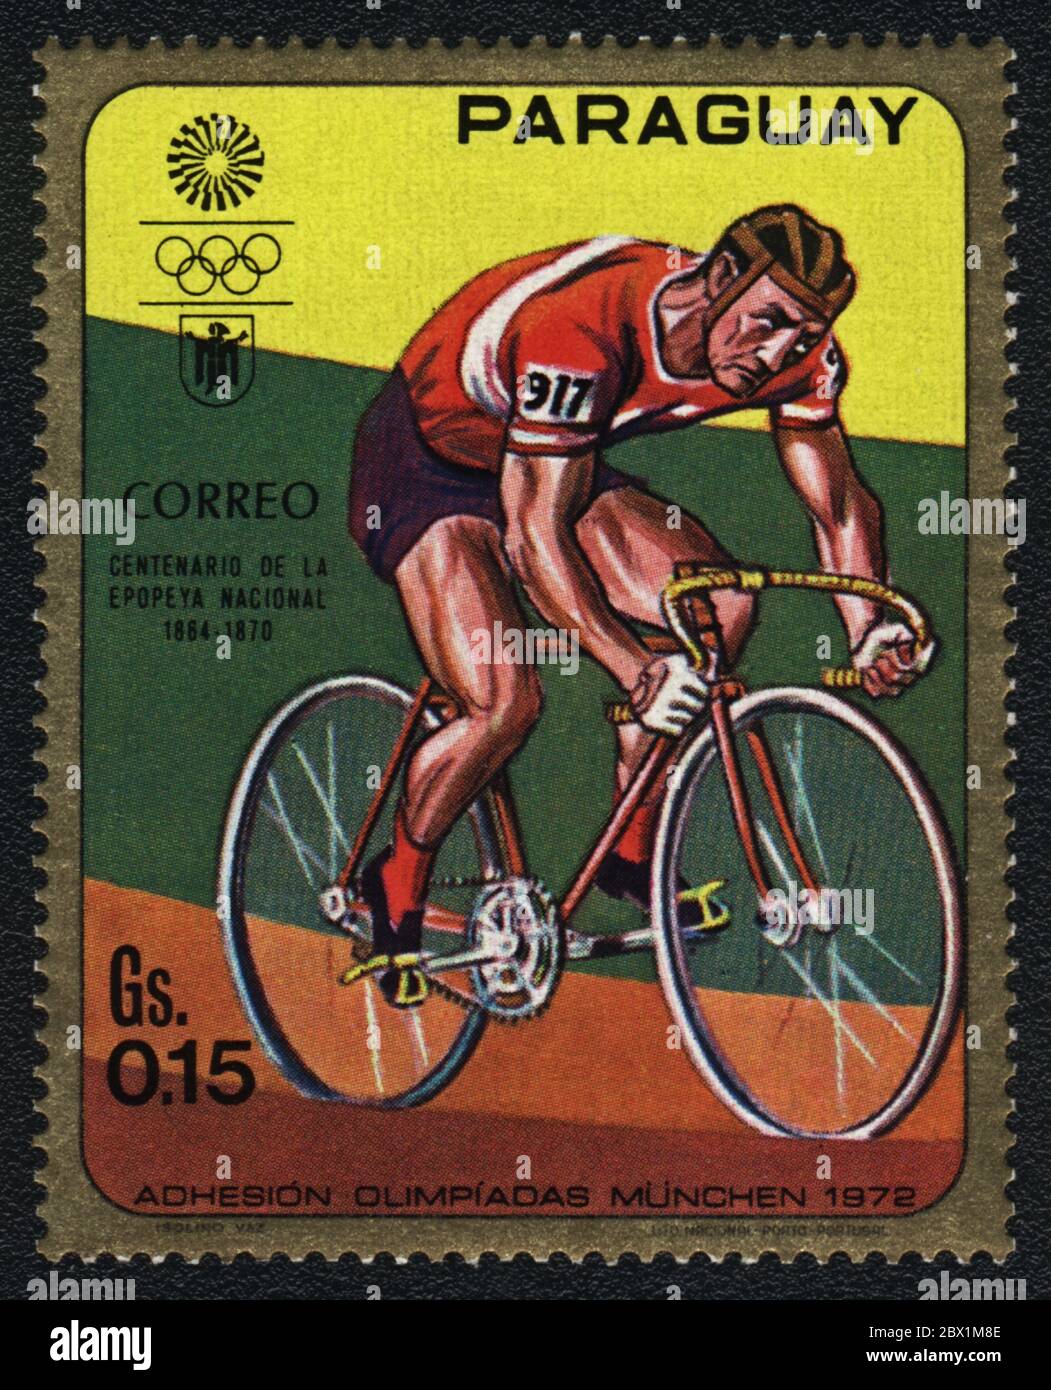 Cycle racing. Summer Olympics Games in Munich 1972. Series: Centenary of the National Epic 1864 - 1870. Postal stamp:  Paraguay, 1972 Stock Photo